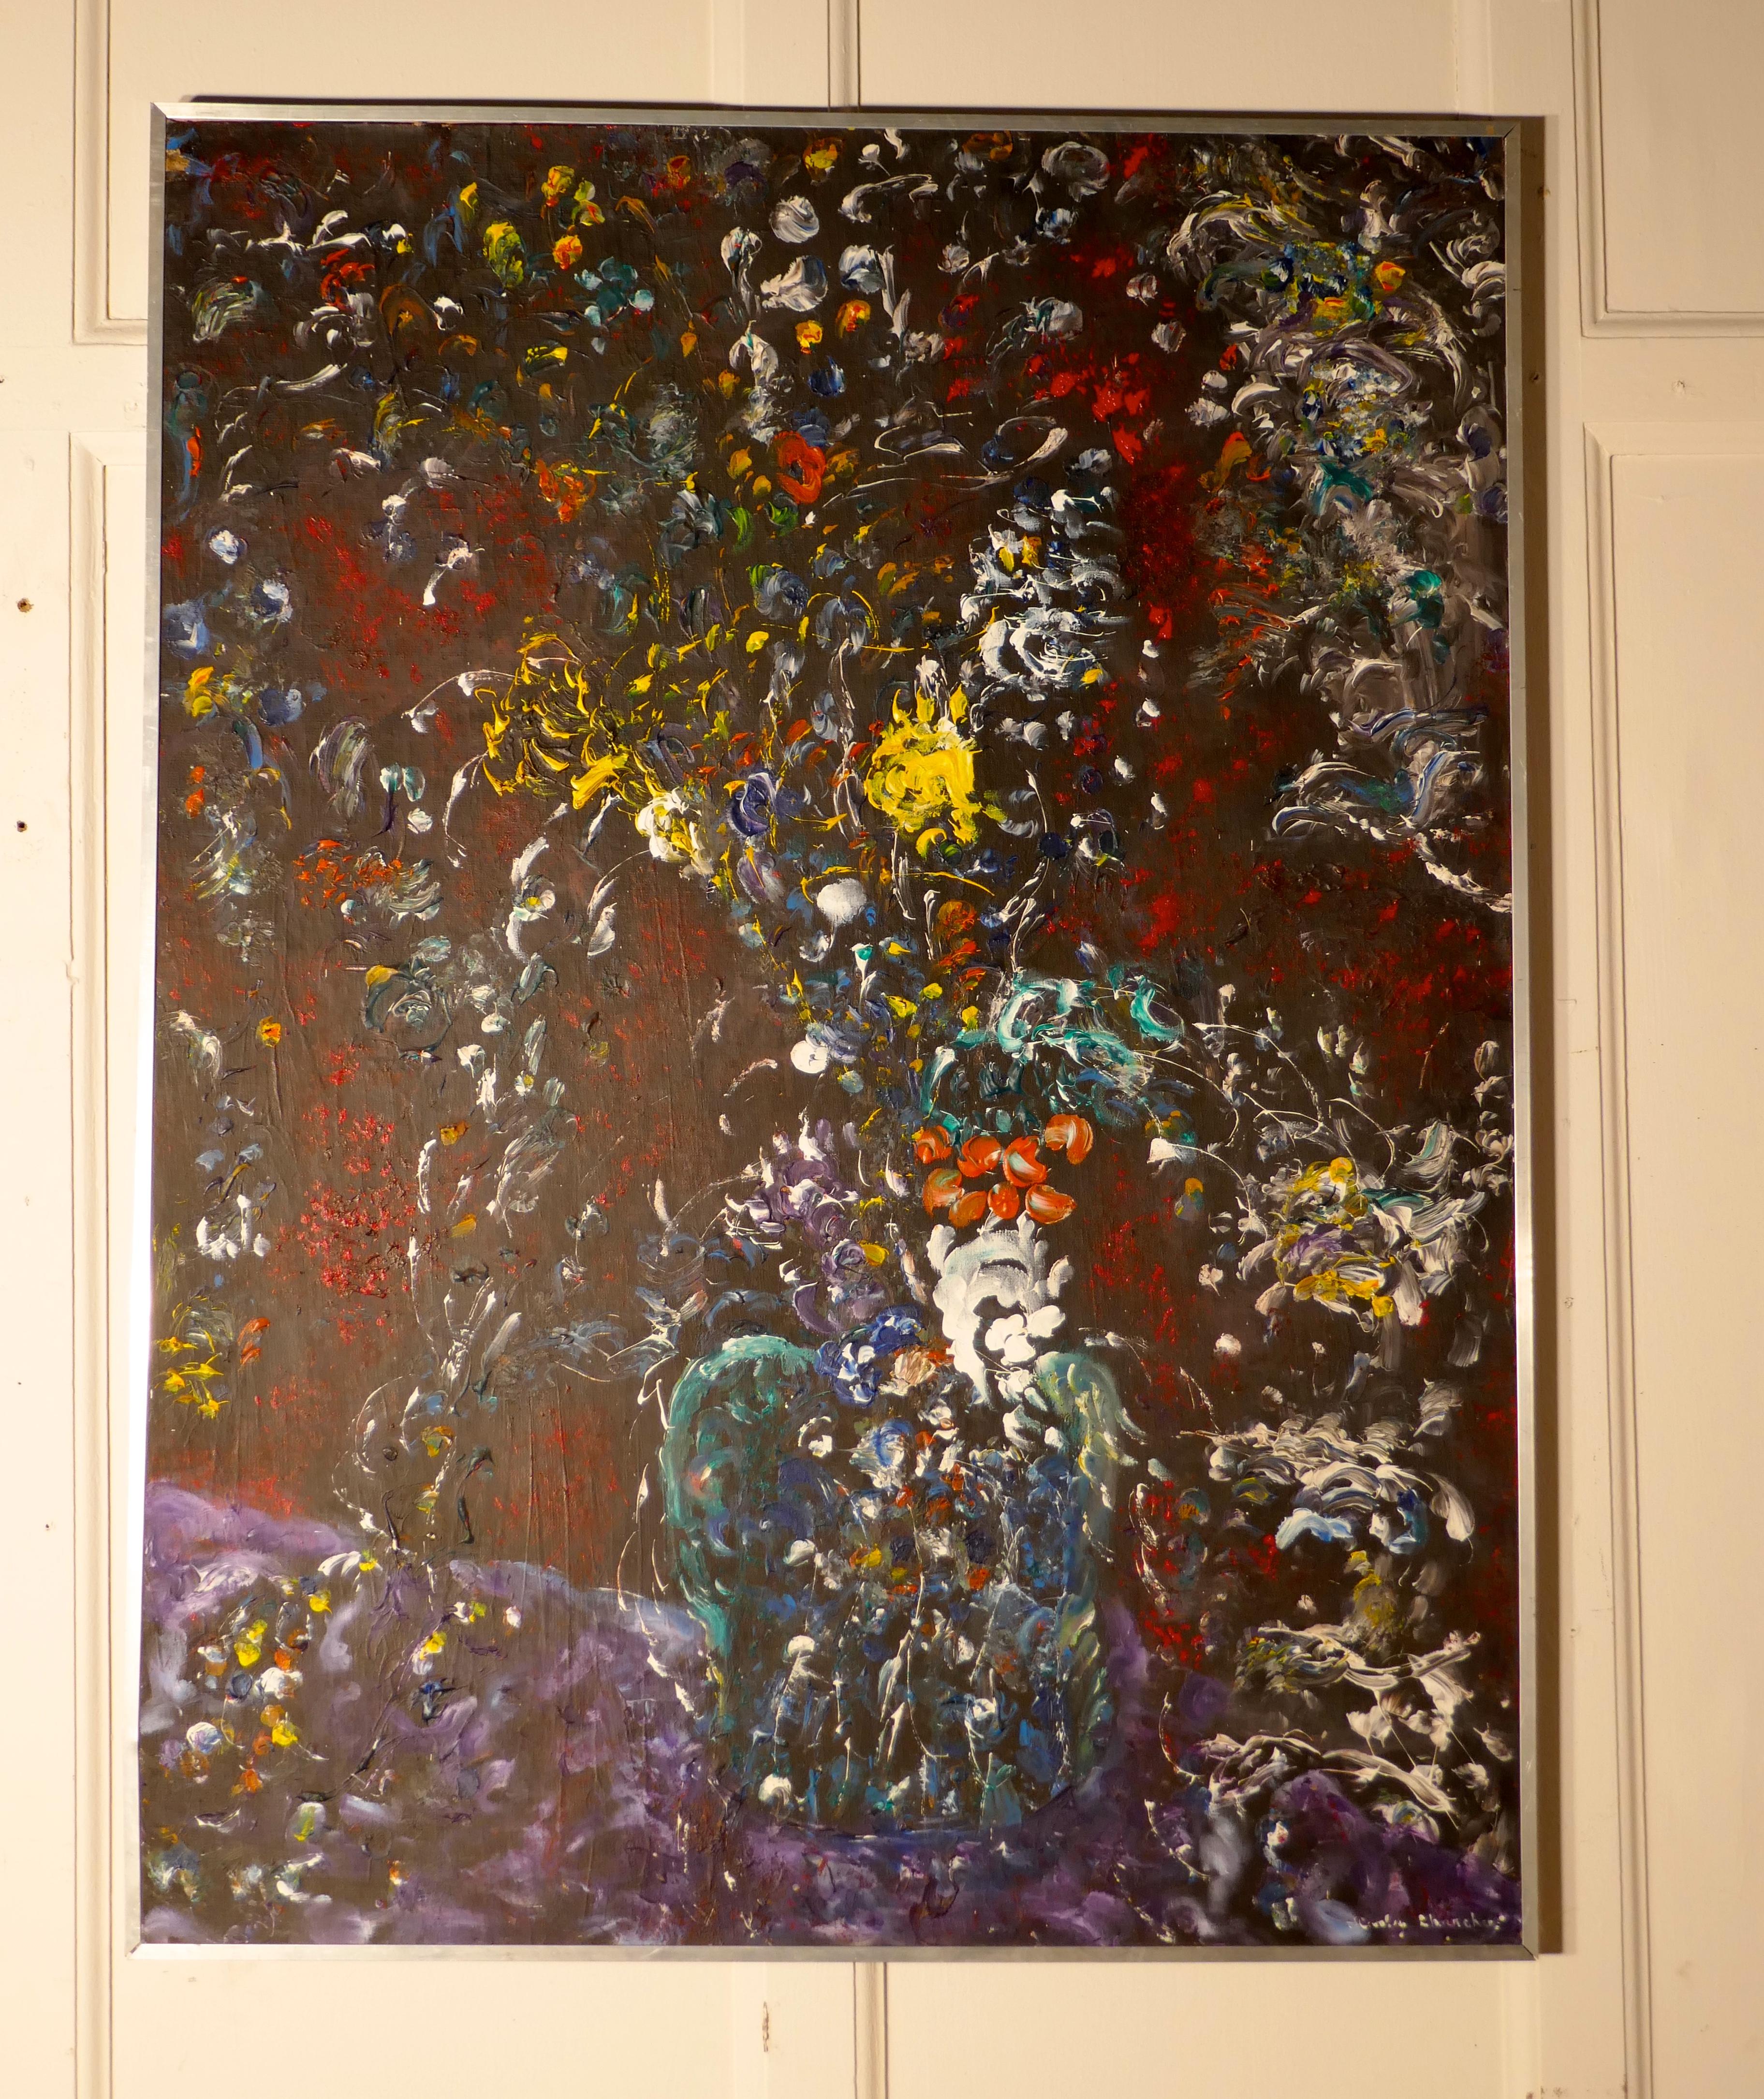 20th Century 1960s-1970s Large Abstract Oil Painting “A splash of Colour” by Stanley Churchus